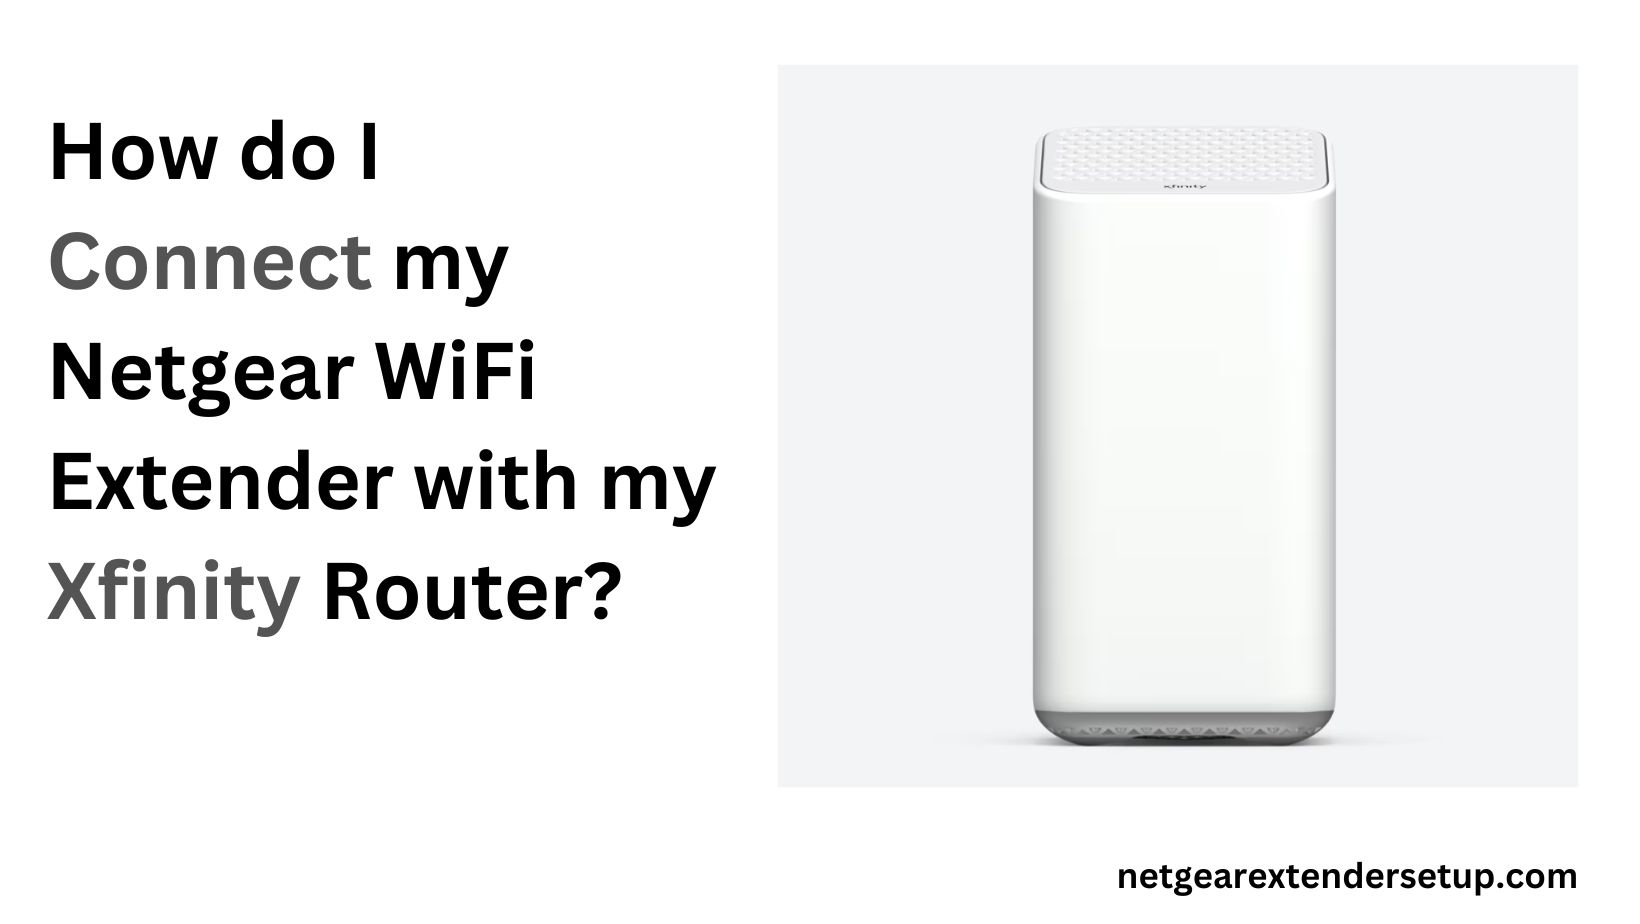 You are currently viewing How do I Connect my Netgear WiFi Extender with my Xfinity Router?